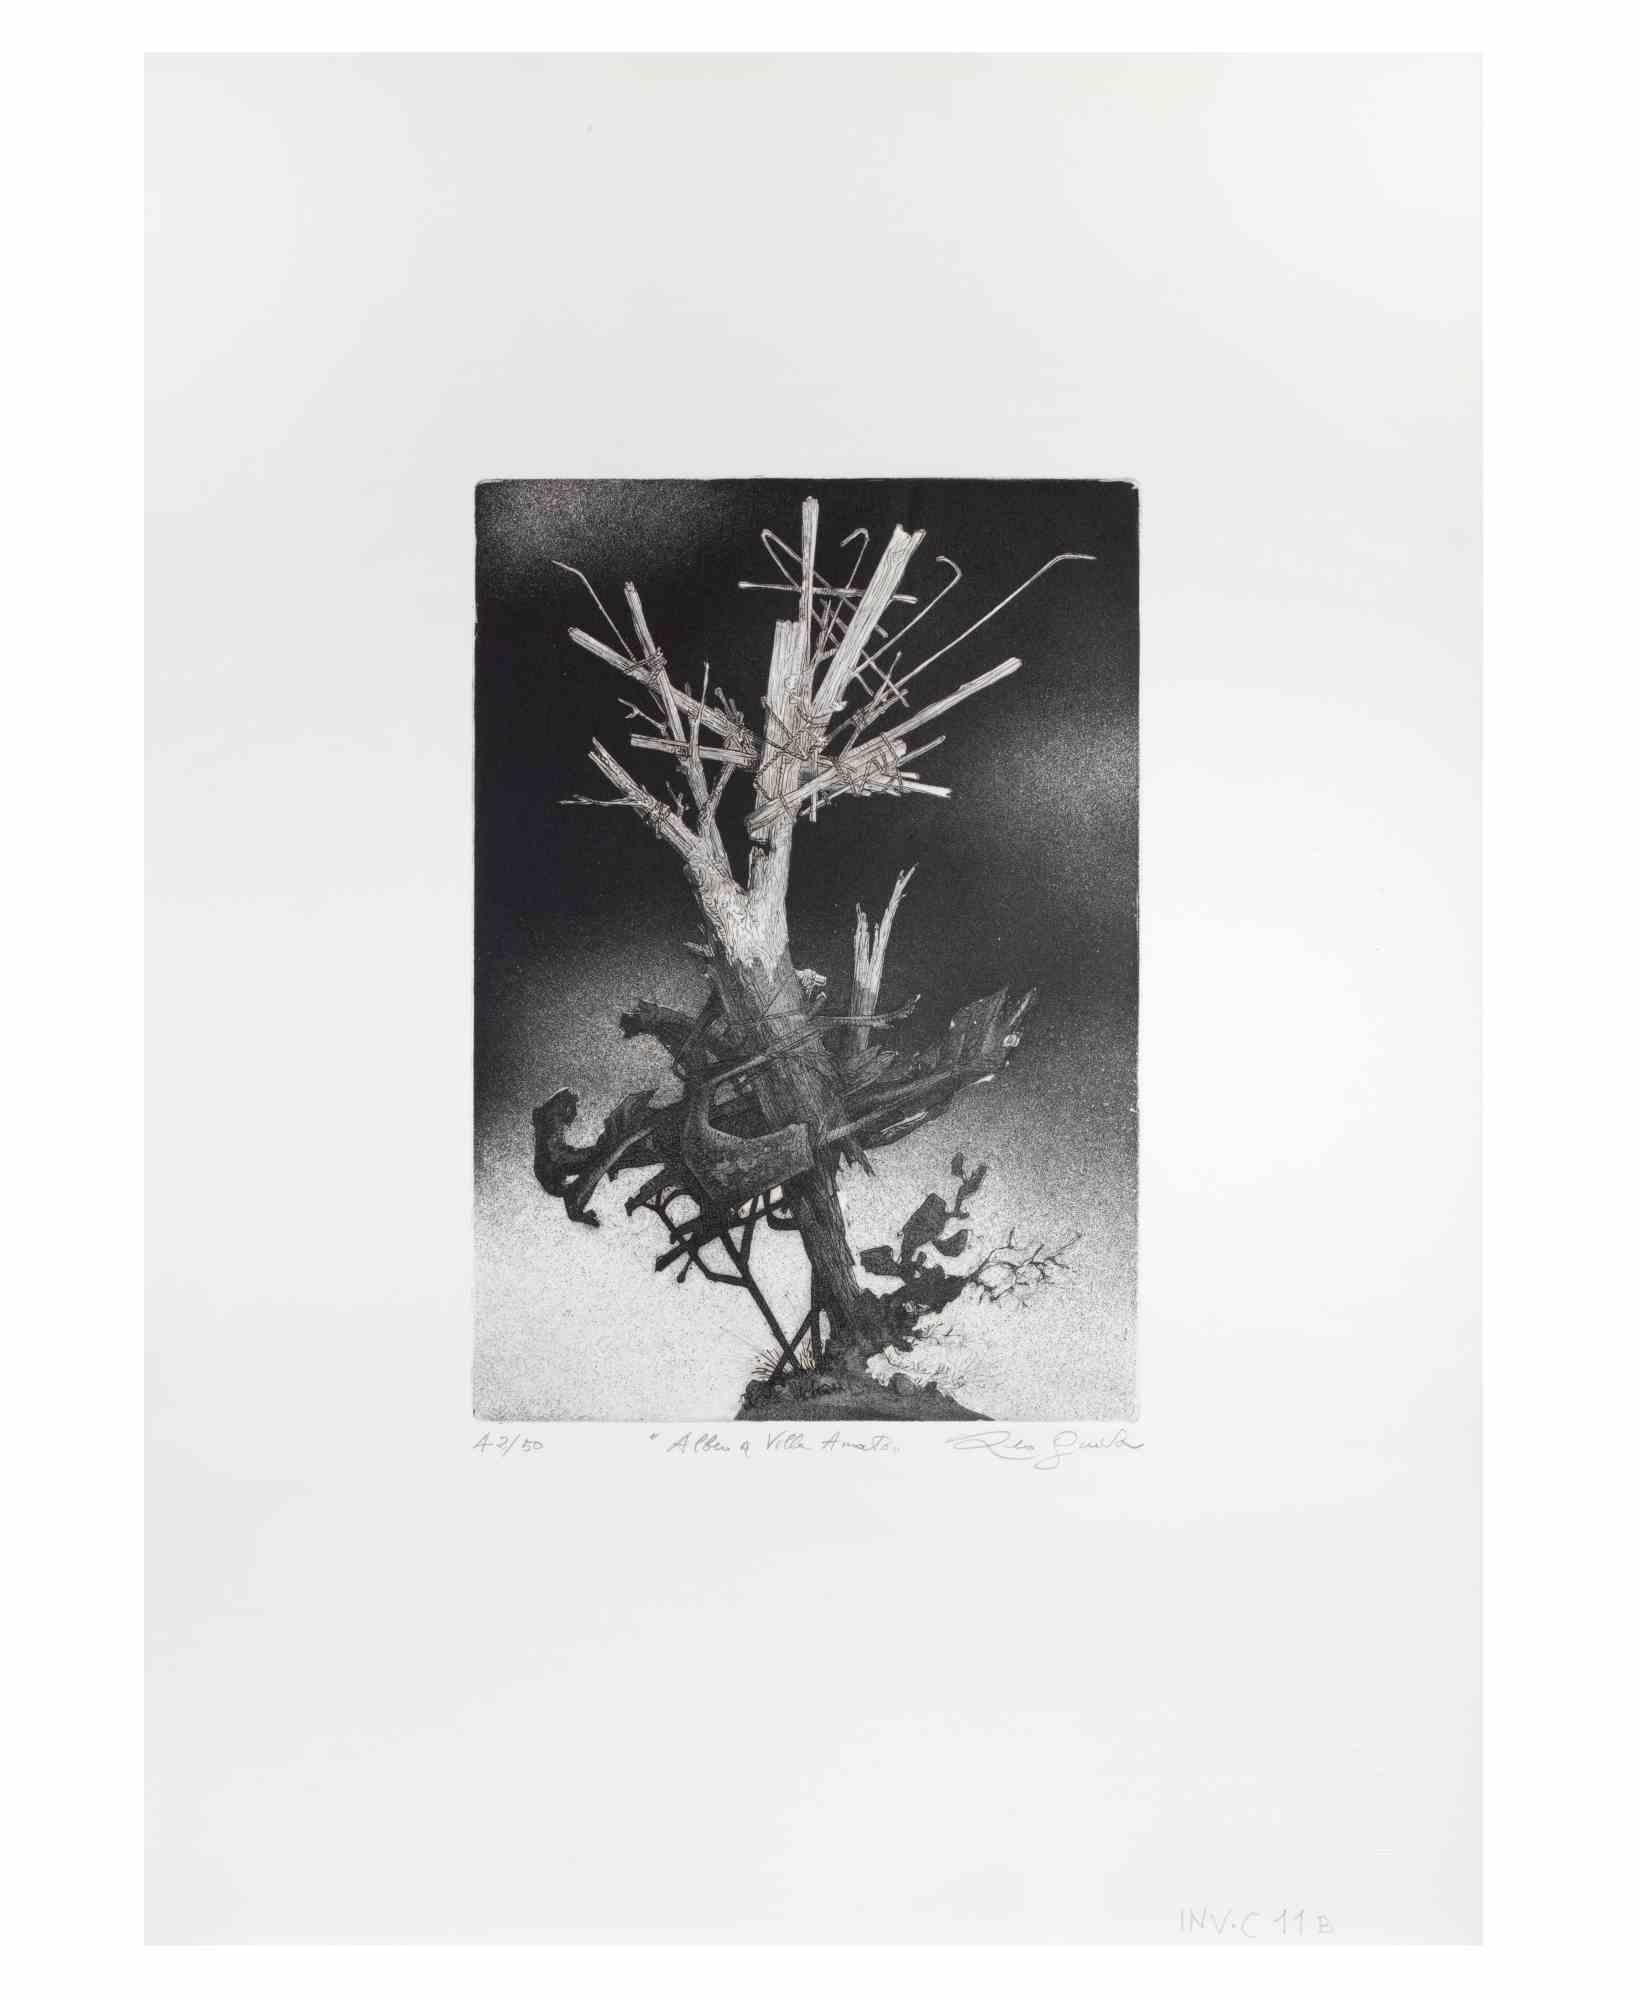 The Tree at Villa is an artwork realized by the Contemporary Italian artist  Leo Guida (1992 - 2017) in the 1970s.

Original black and white etching on paper.

Hand Signed on the lower right margin, numbered edition of 50 prints, on the lower left